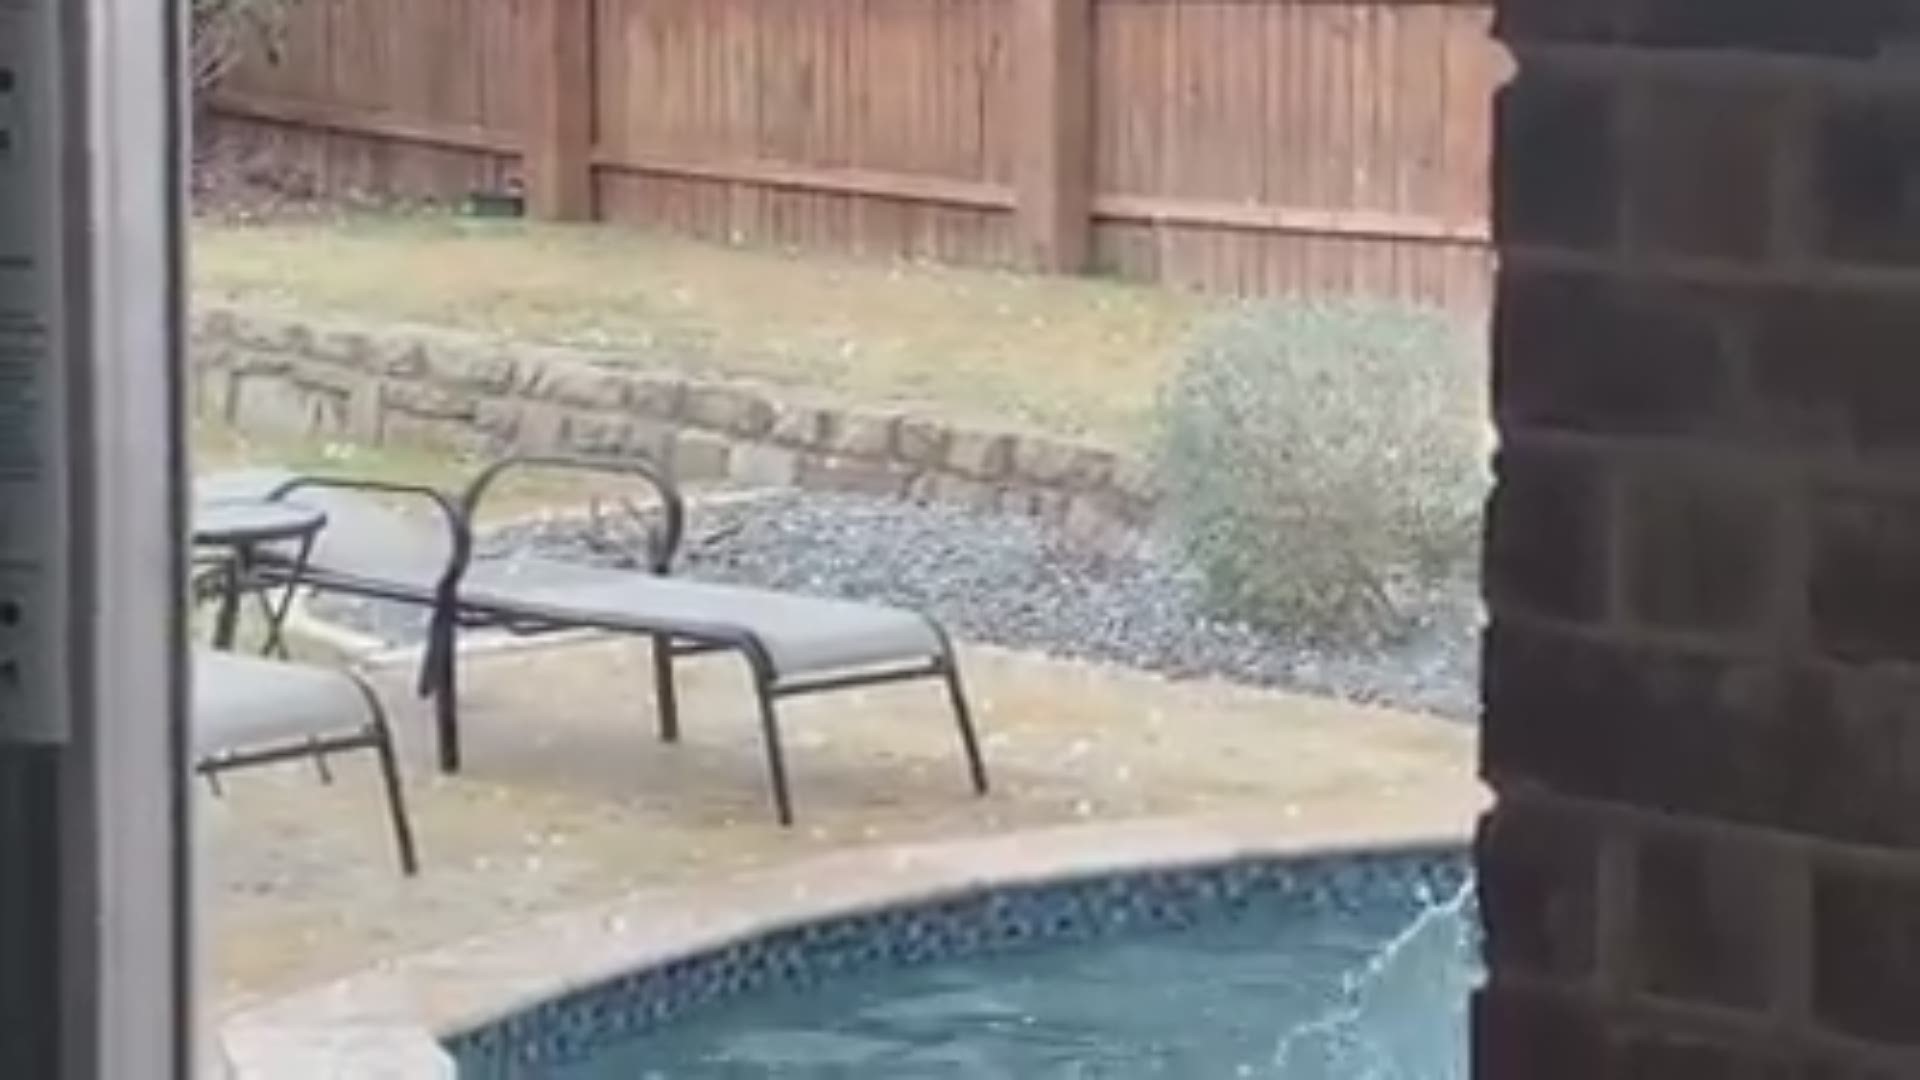 Kit McGee sent us some video of hail in Allen.